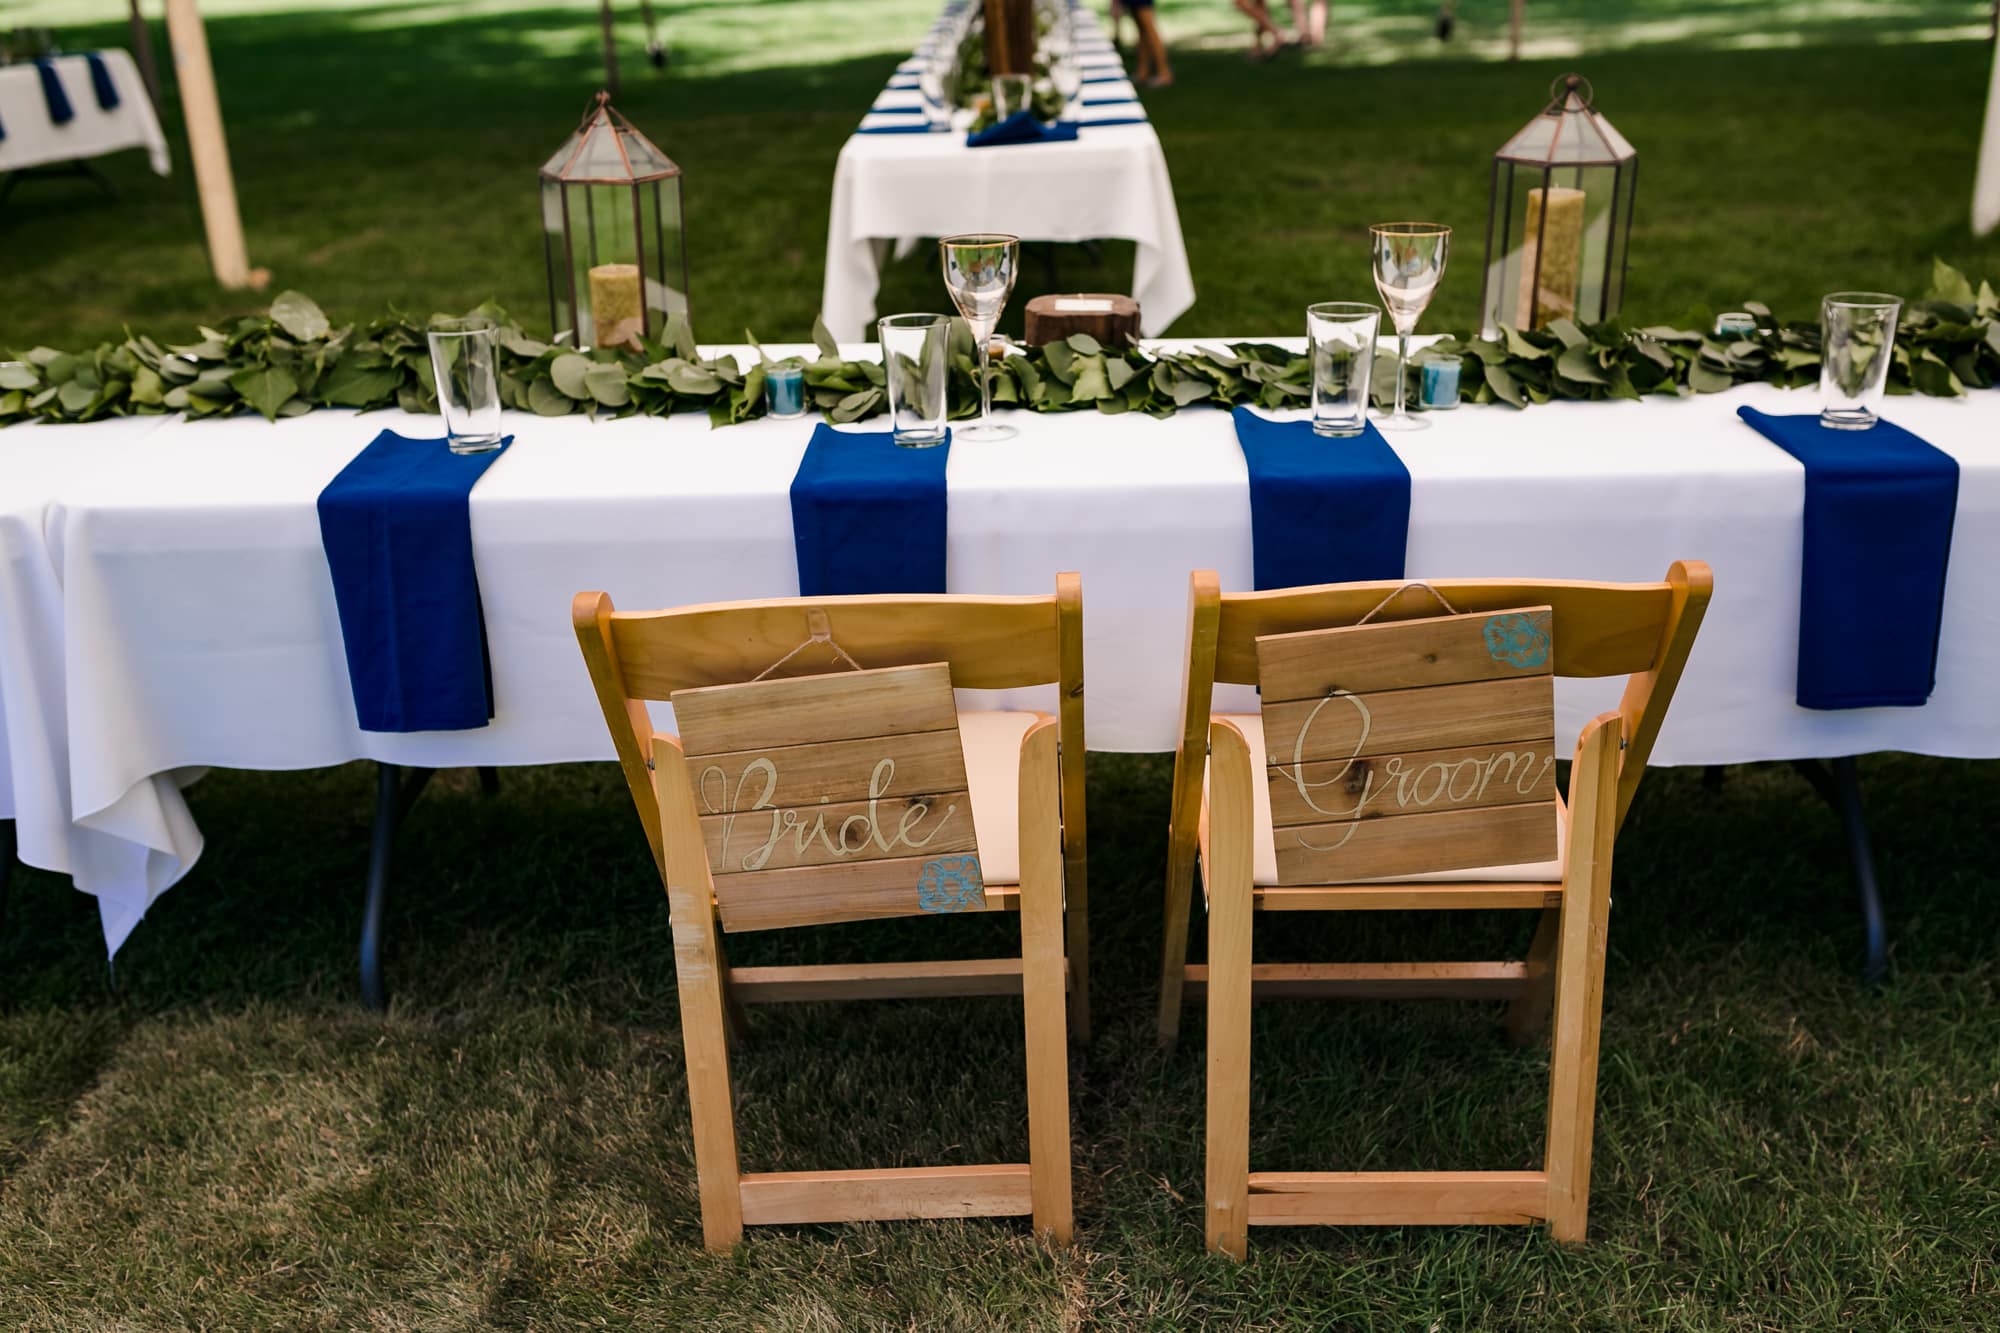 wood decor at wedding, floral table runner, eucalyptus table runner, blue and white wedding, simple wedding decor, backyard wedding, tent wedding, blue and green wedding, outdoor wedding, outdoor wedding reception, outdoor wedding dinner